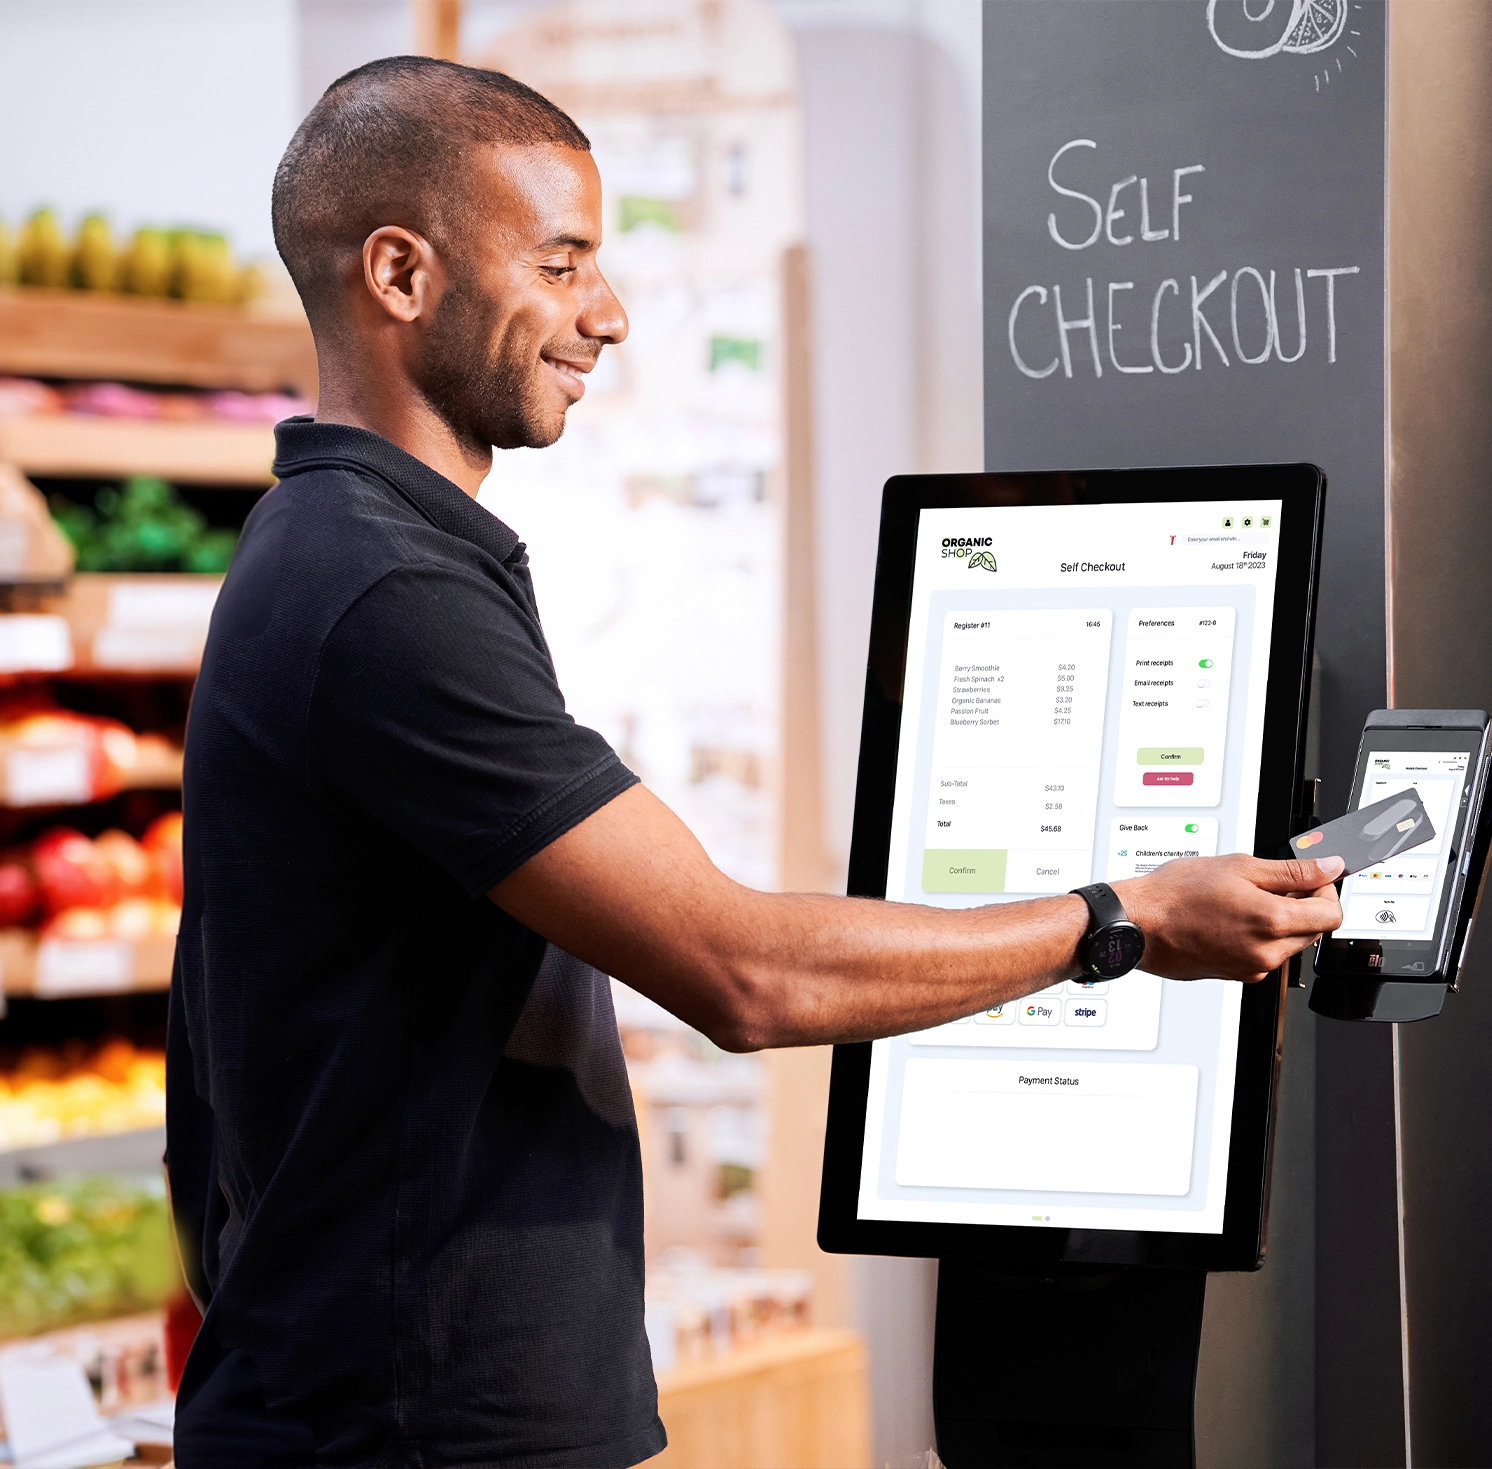 Image of grocery store self-checkout